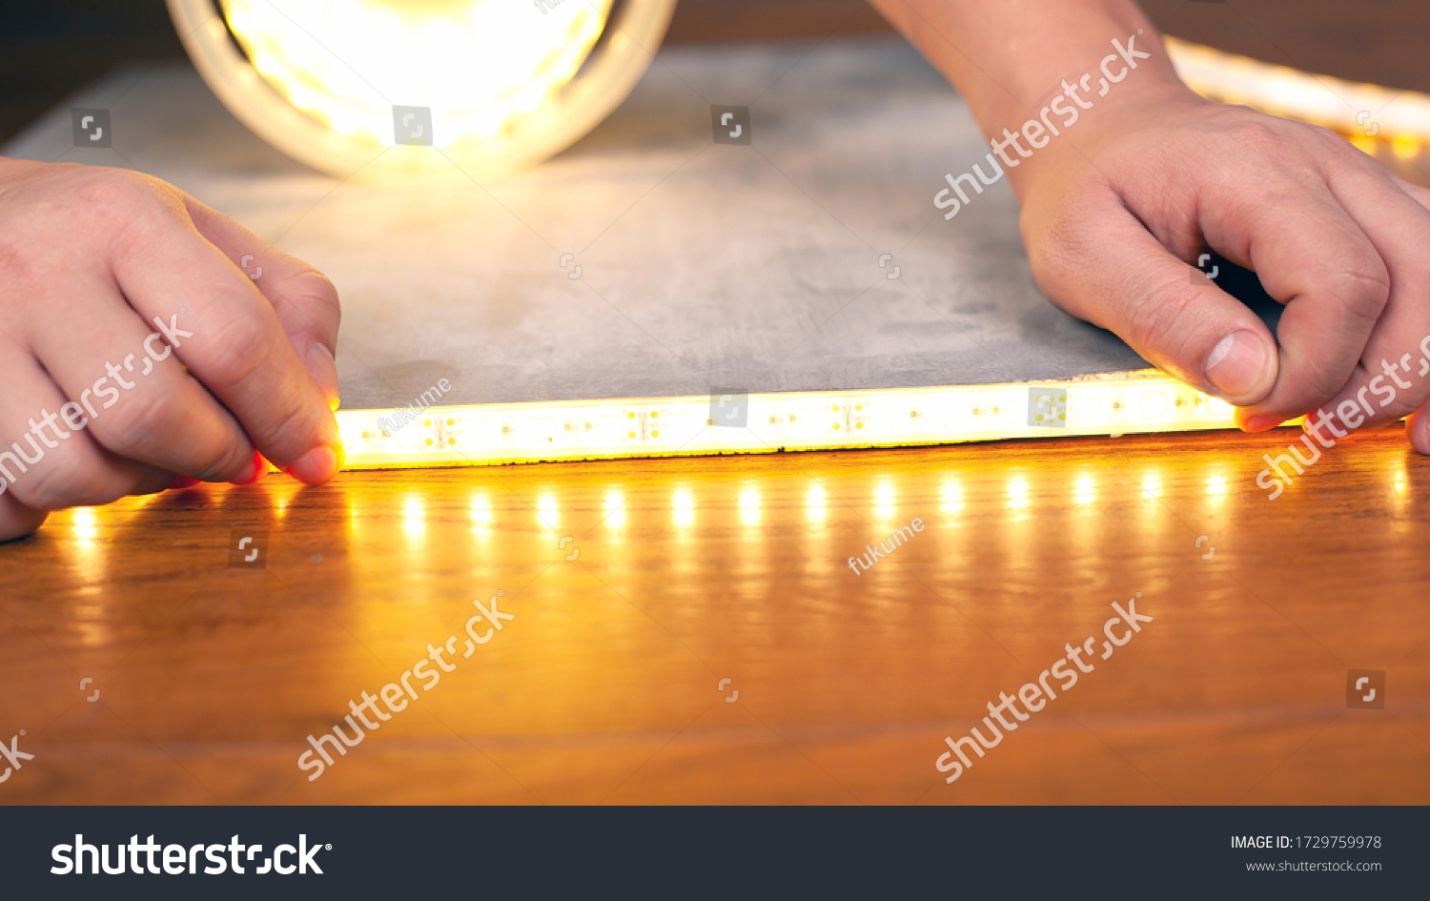 stock-photo-the-master-installs-a-luminous-led-strip-close-up-hands-stick-tape-on-a-wooden-surface-1729759978.jpg